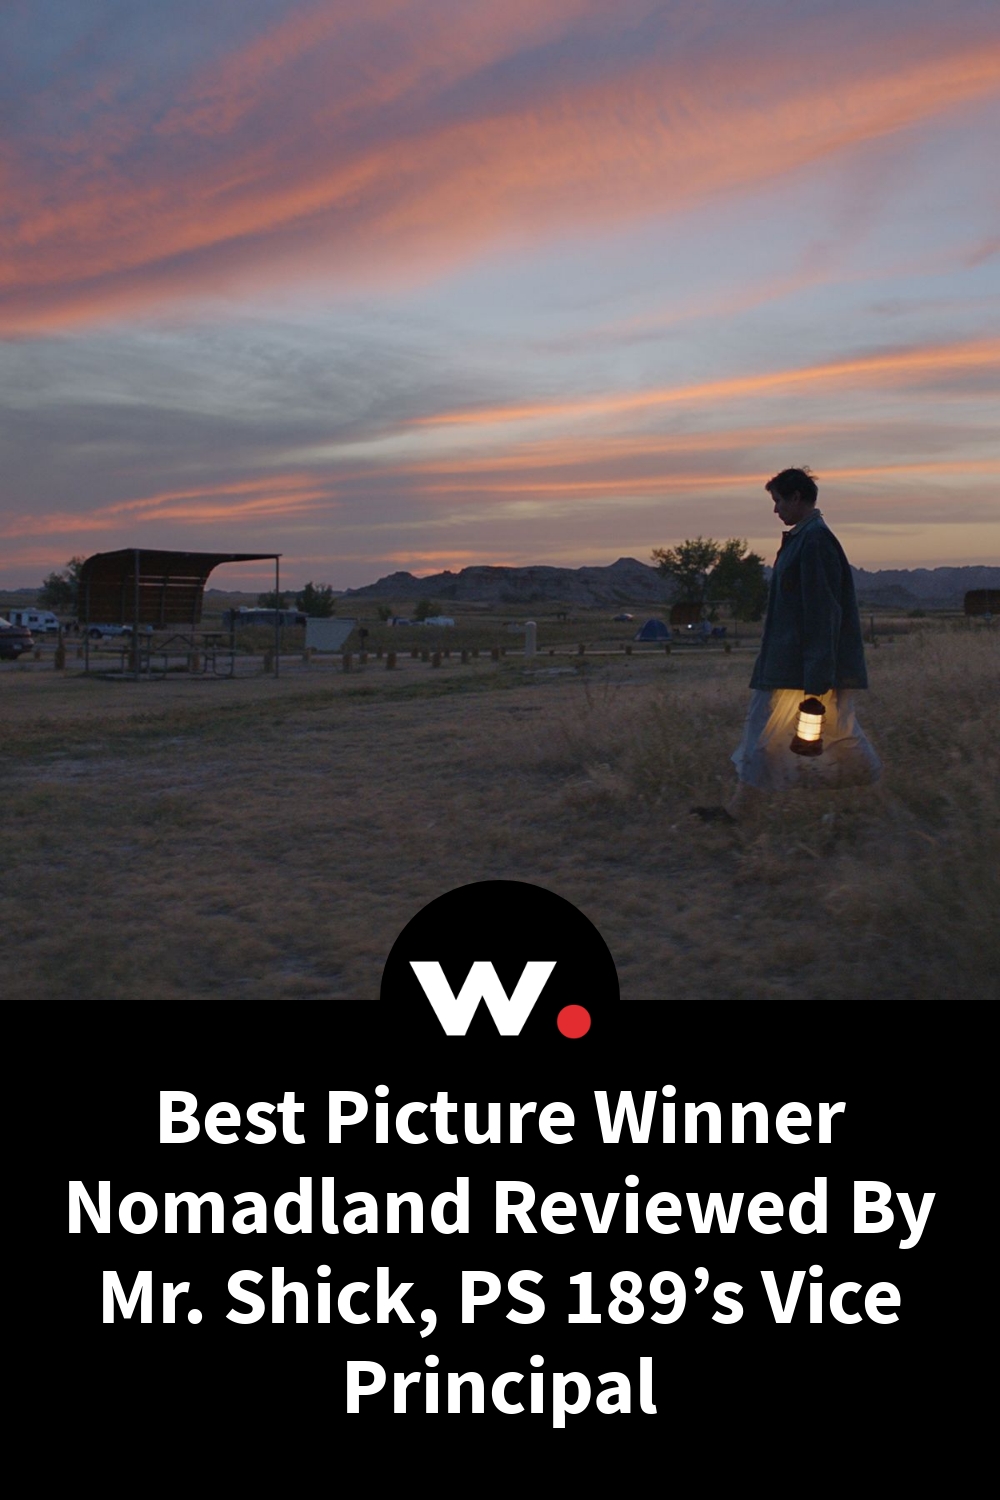 Best Picture Winner Nomadland Reviewed By Mr. Shick, PS 189’s Vice Principal